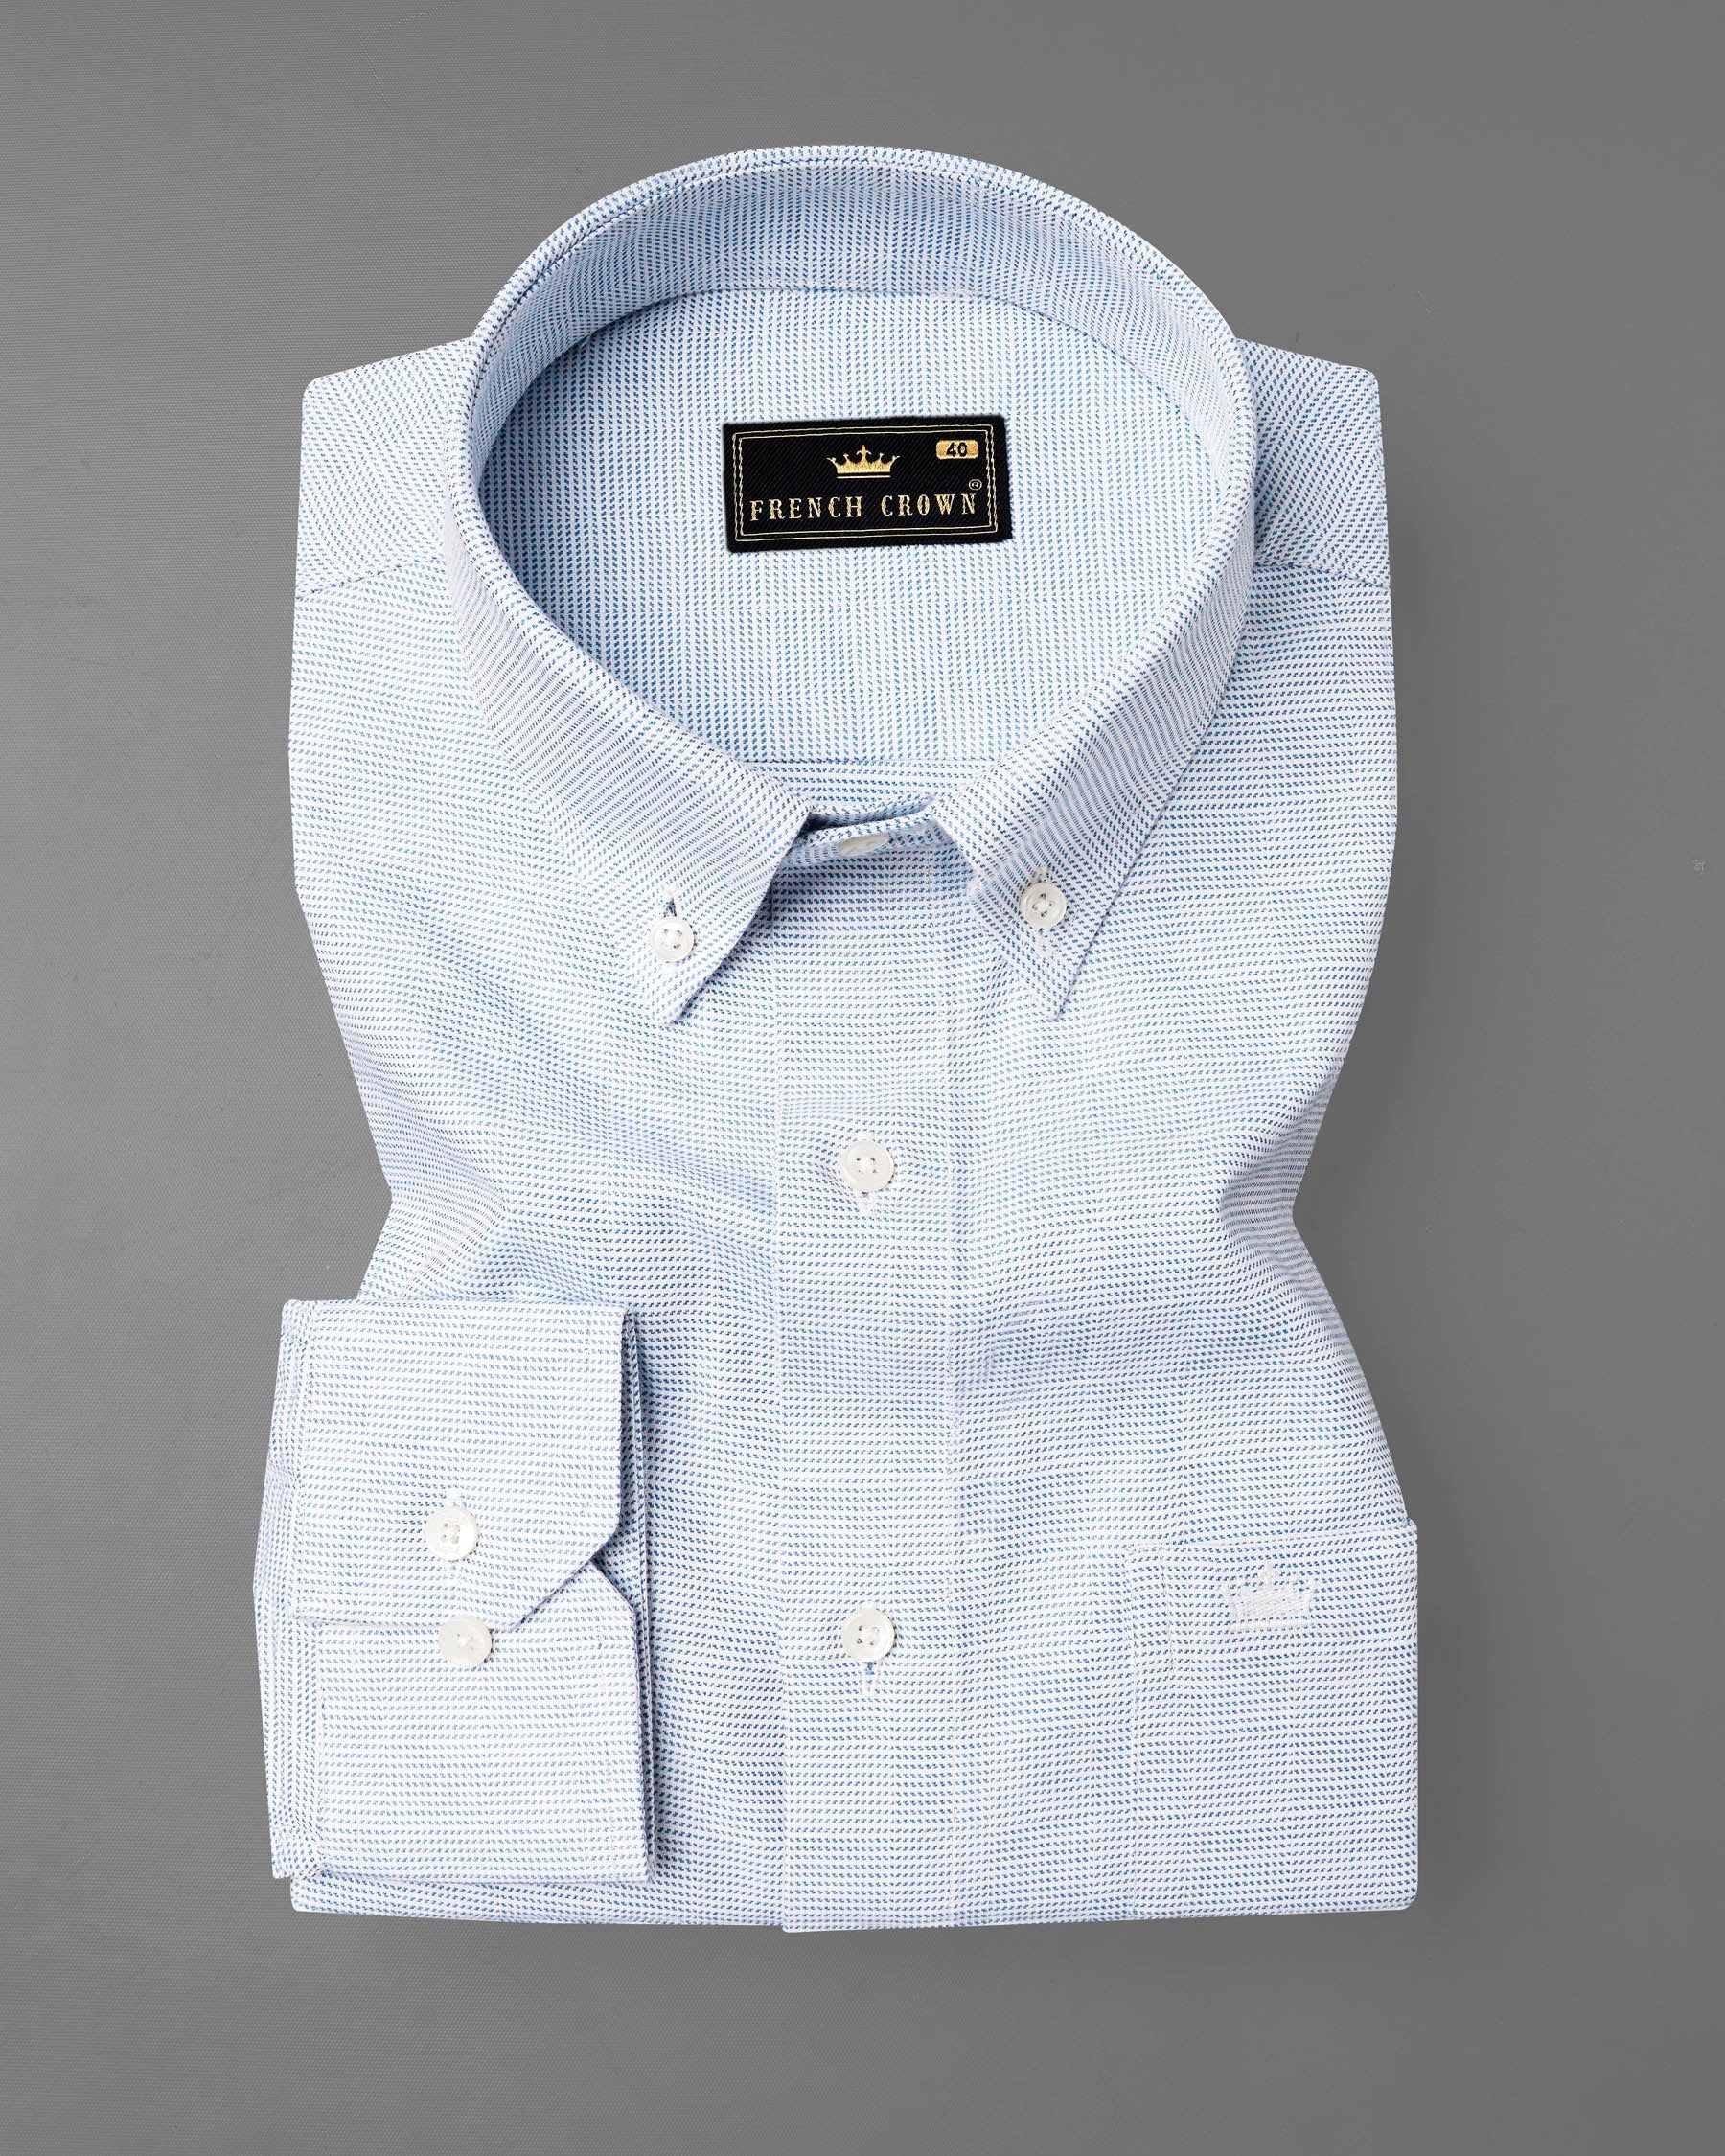 Ship Cove Blue and White Dobby Textured Premium Giza Cotton Shirt 7956-BD-38,7956-BD-H-38,7956-BD-39,7956-BD-H-39,7956-BD-40,7956-BD-H-40,7956-BD-42,7956-BD-H-42,7956-BD-44,7956-BD-H-44,7956-BD-46,7956-BD-H-46,7956-BD-48,7956-BD-H-48,7956-BD-50,7956-BD-H-50,7956-BD-52,7956-BD-H-52